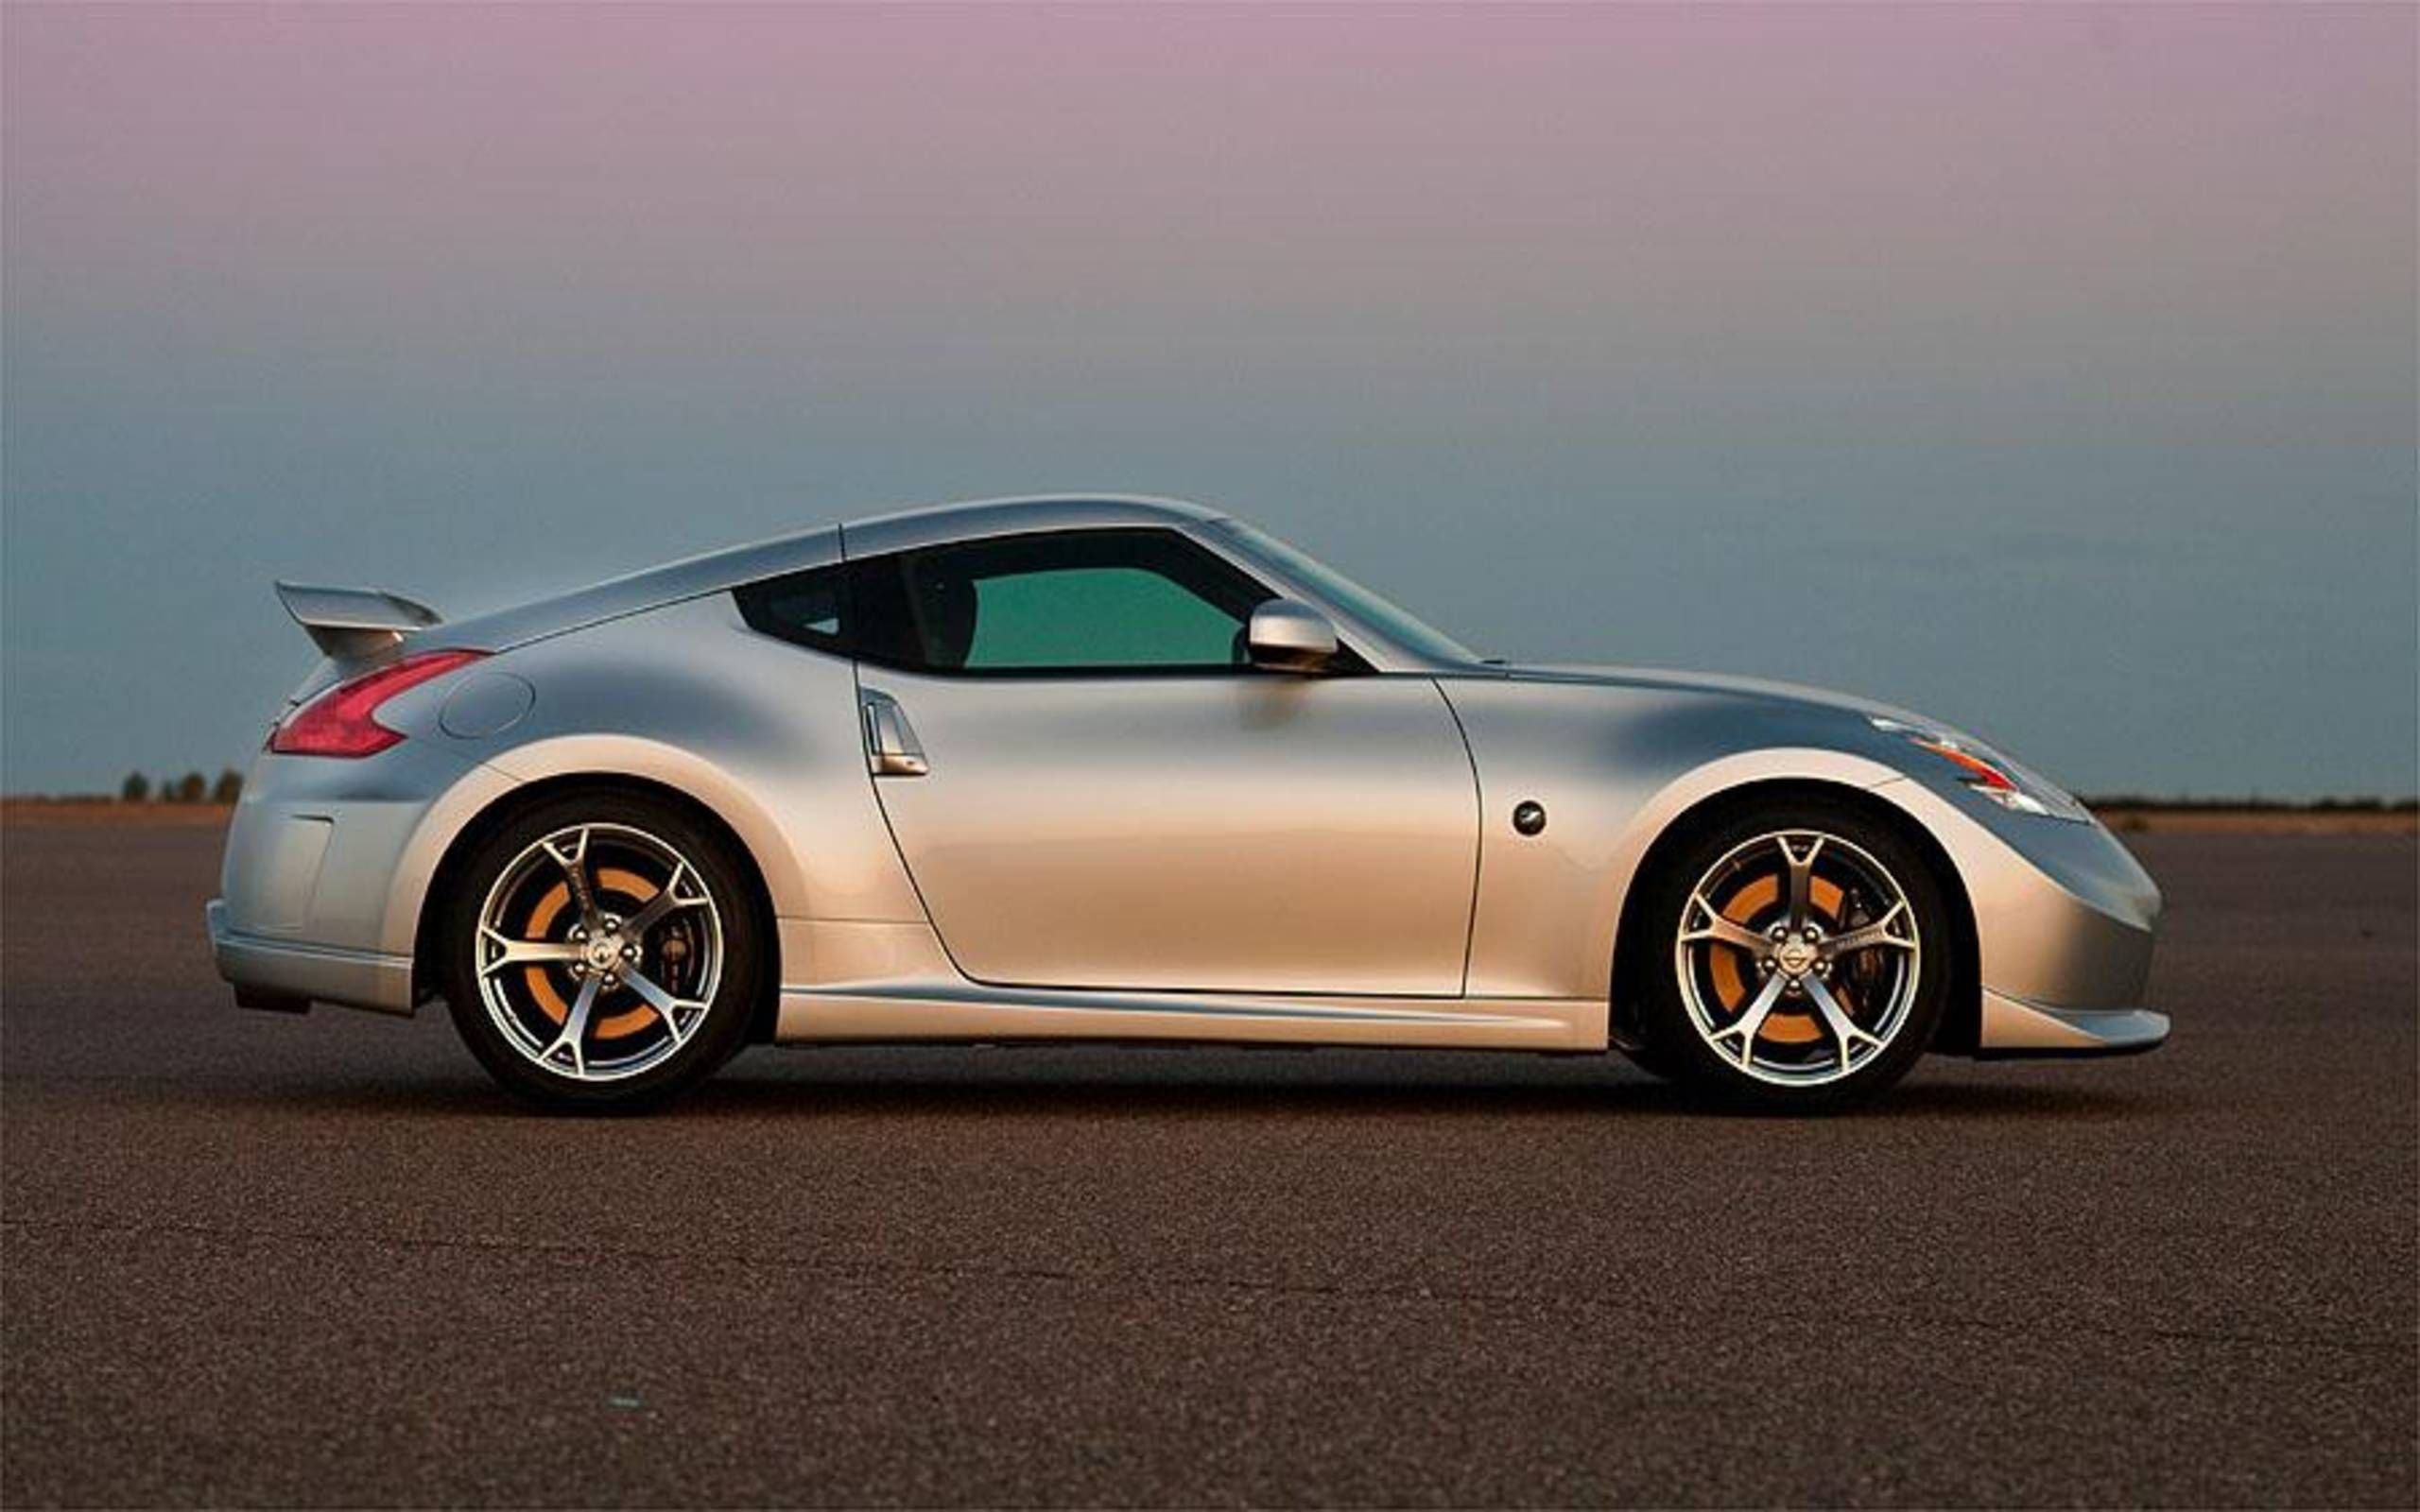 2009 Nissan Nismo 370Z gains power, starts at less than $40,000